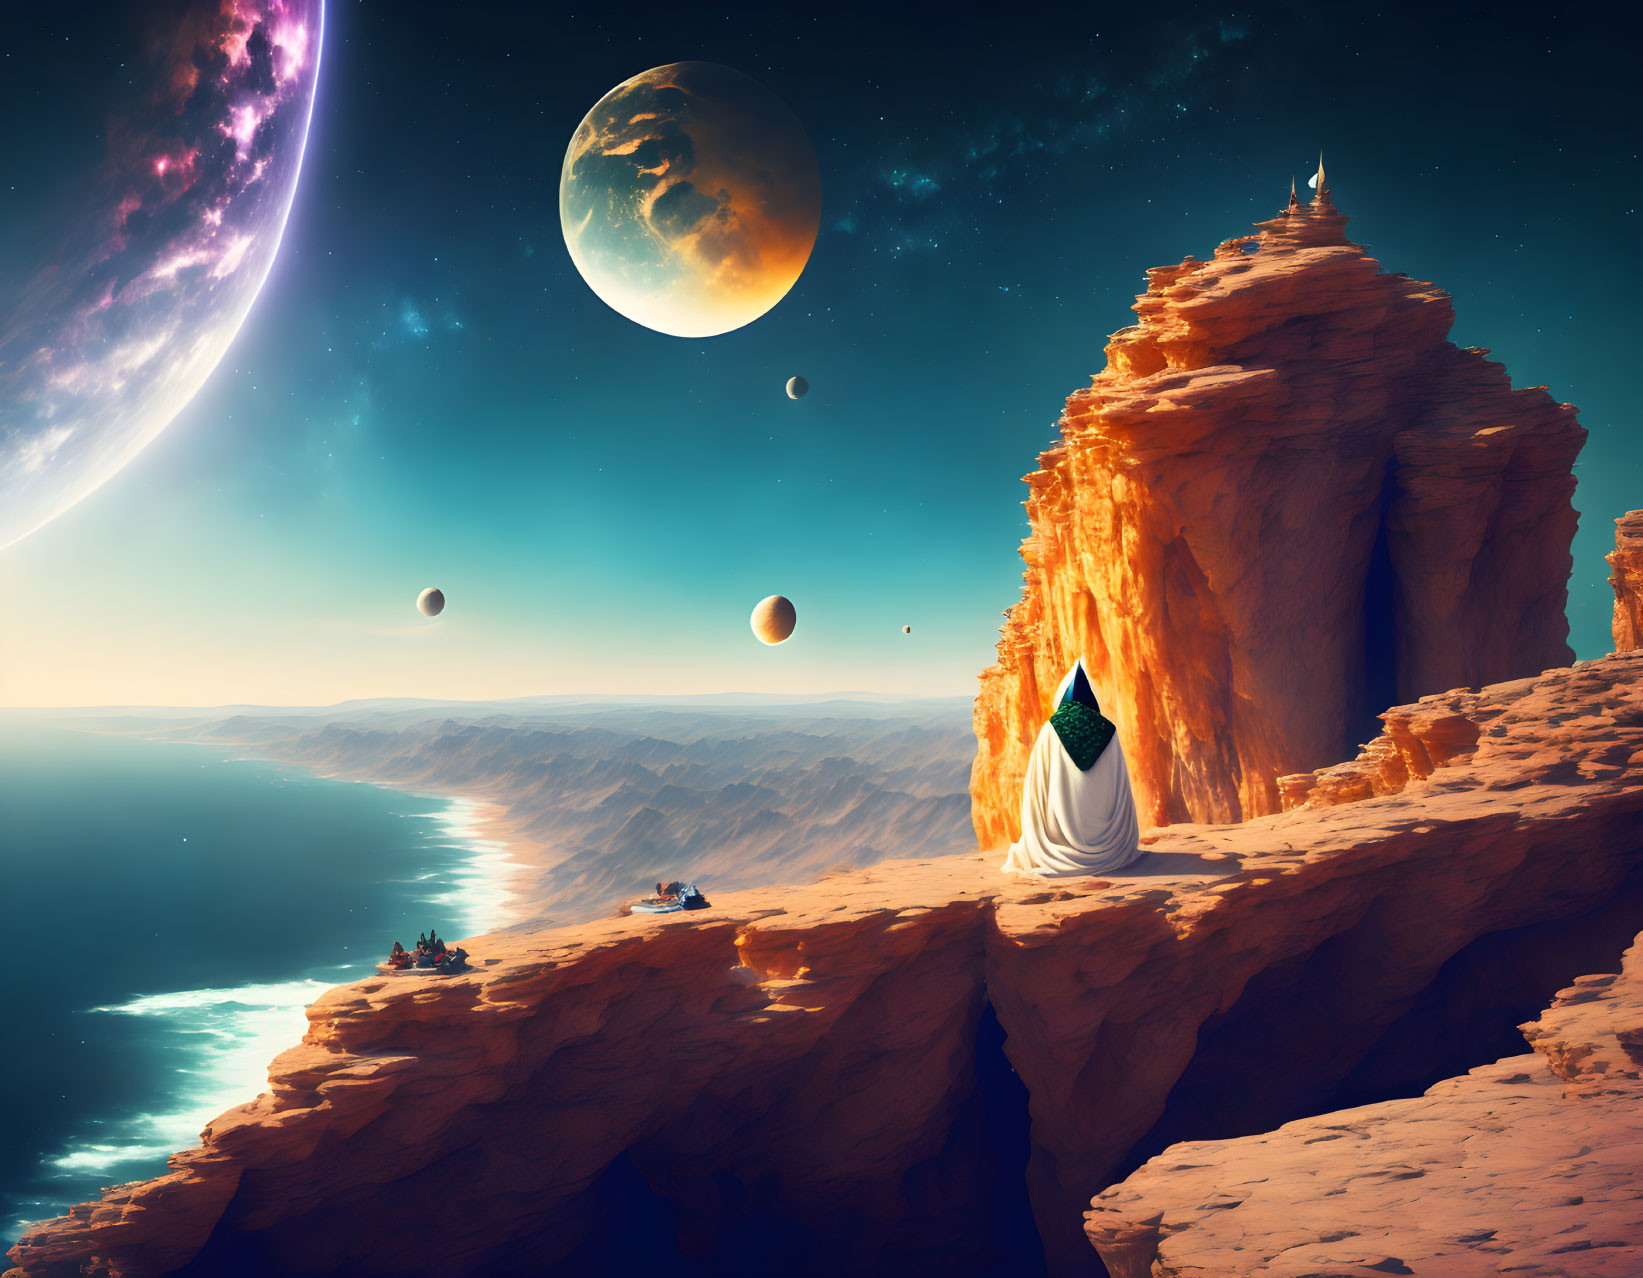 Robed figure on desert cliff gazes at ocean and rising planets